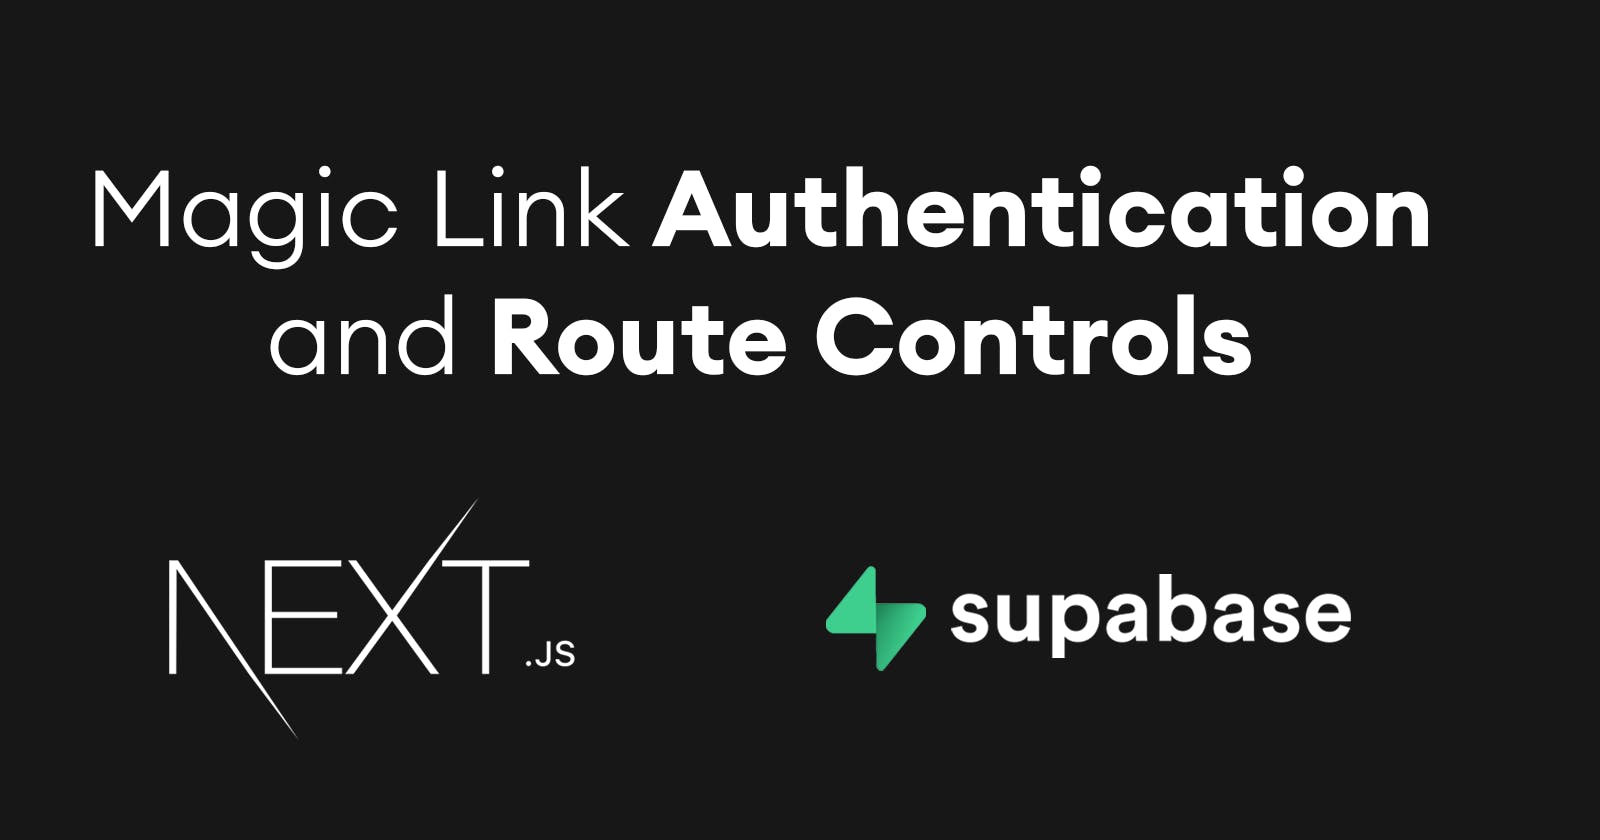 Magic Link Authentication and Route Controls with Supabase and Next.js